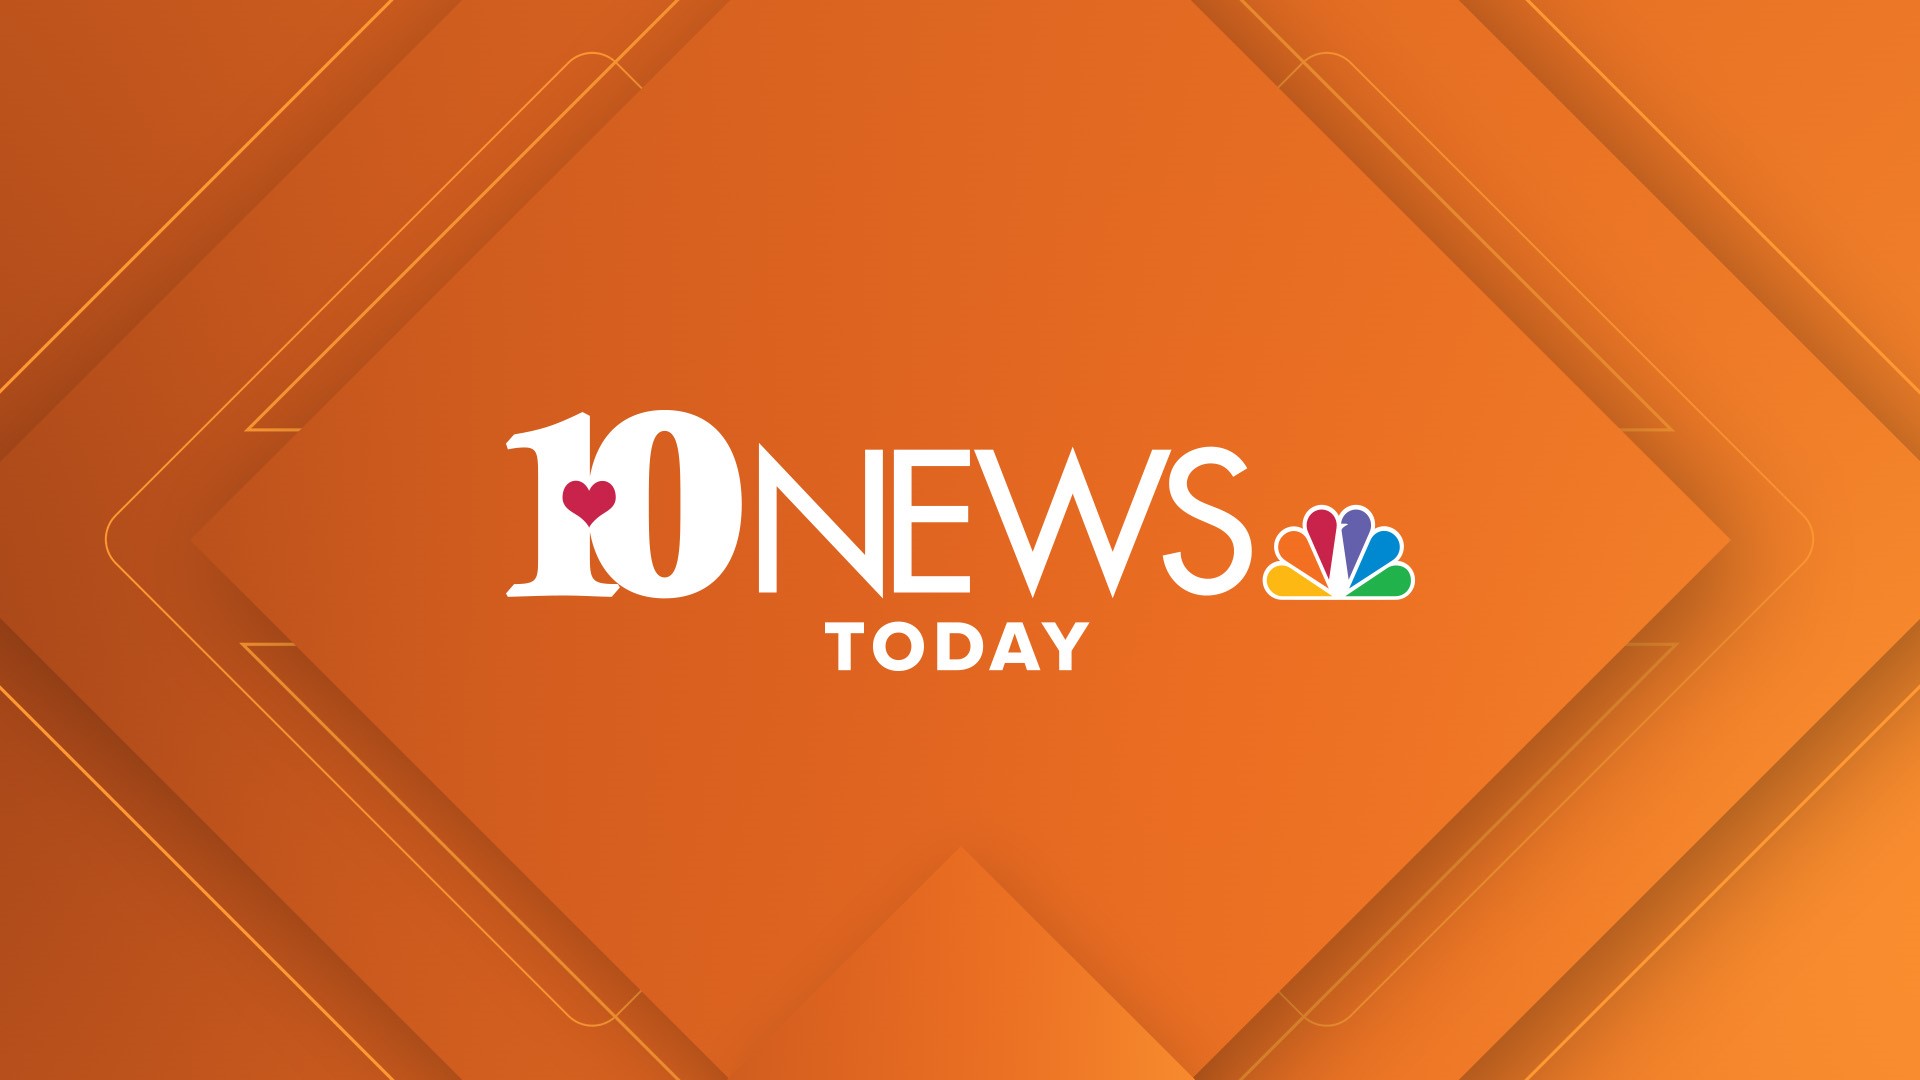 Wake up with WBIR for all the latest news, weather and traffic updates Straight from the Heart of Knoxville and East Tennessee.